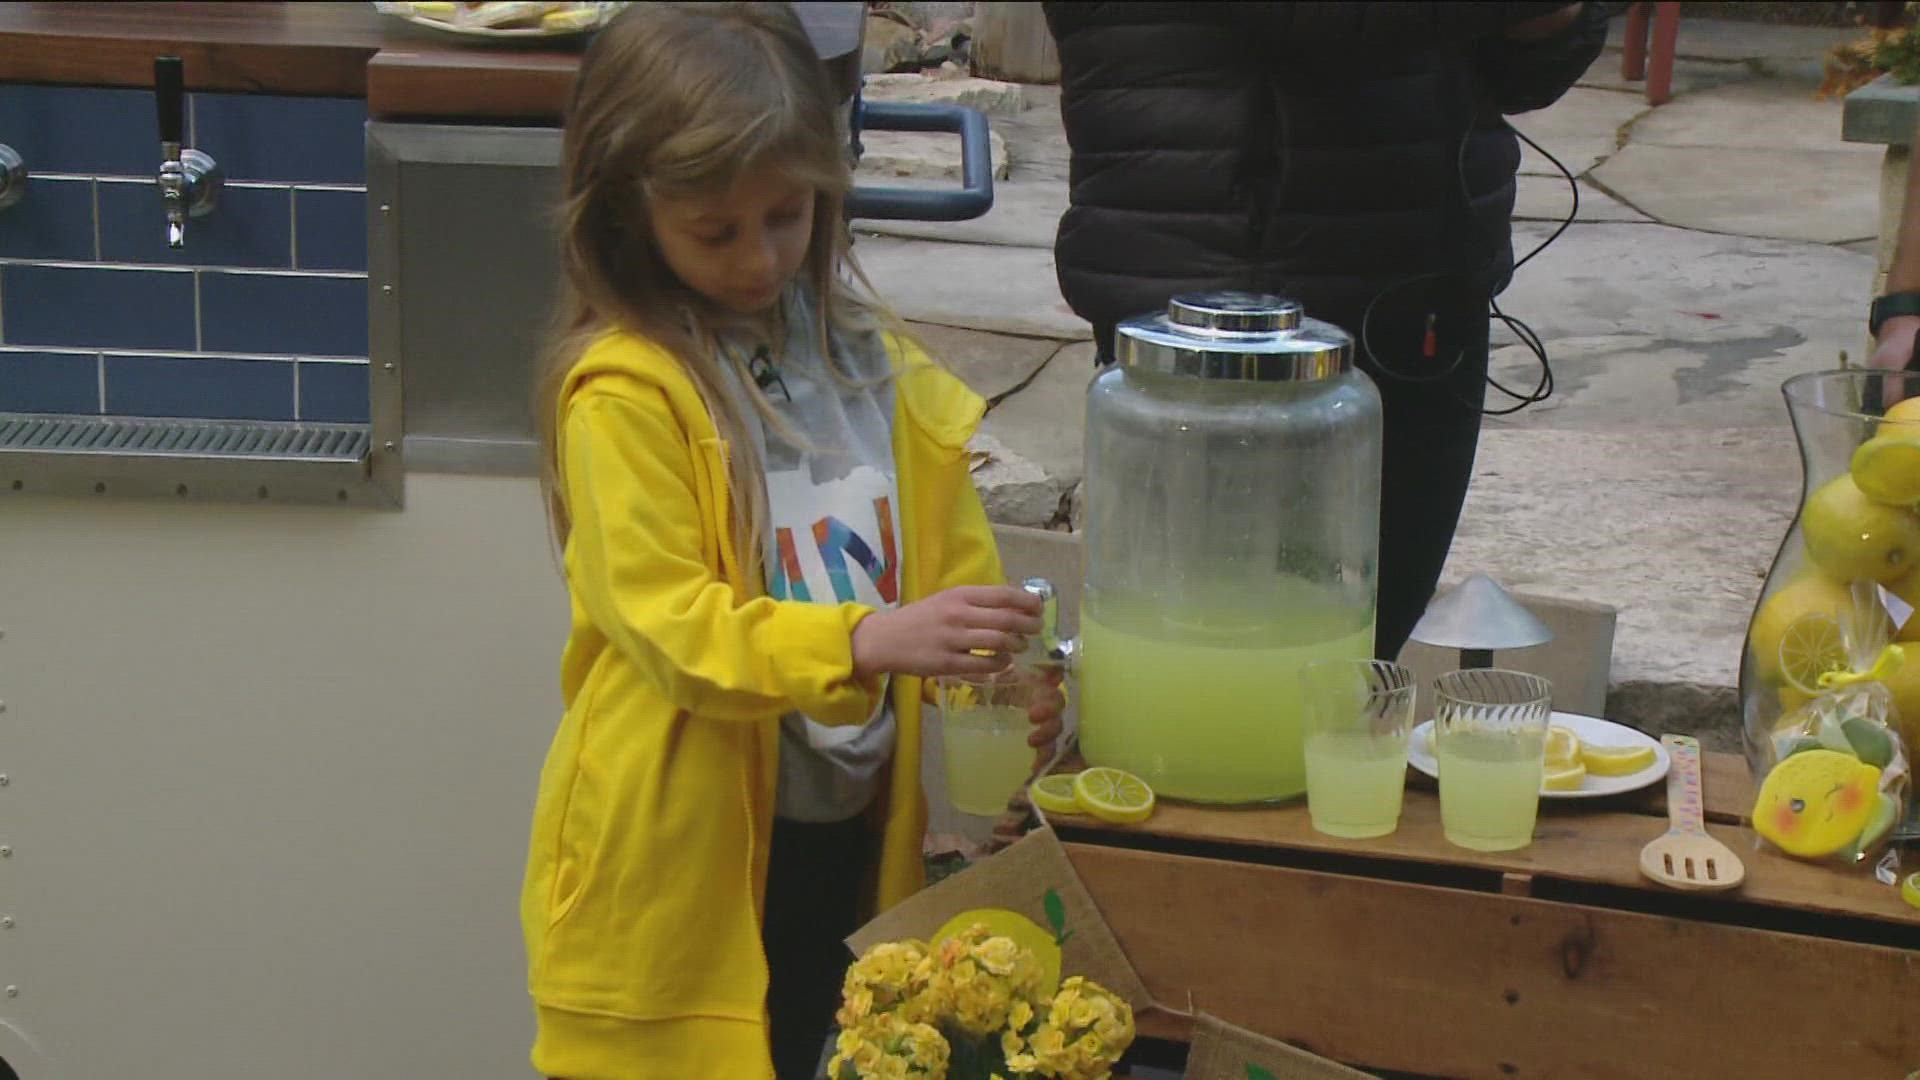 During KARE 11 Saturday, 7-year-old Brynlee, 4-year-old Emma and their dad talked about their second annual lemonade stand fundraiser.